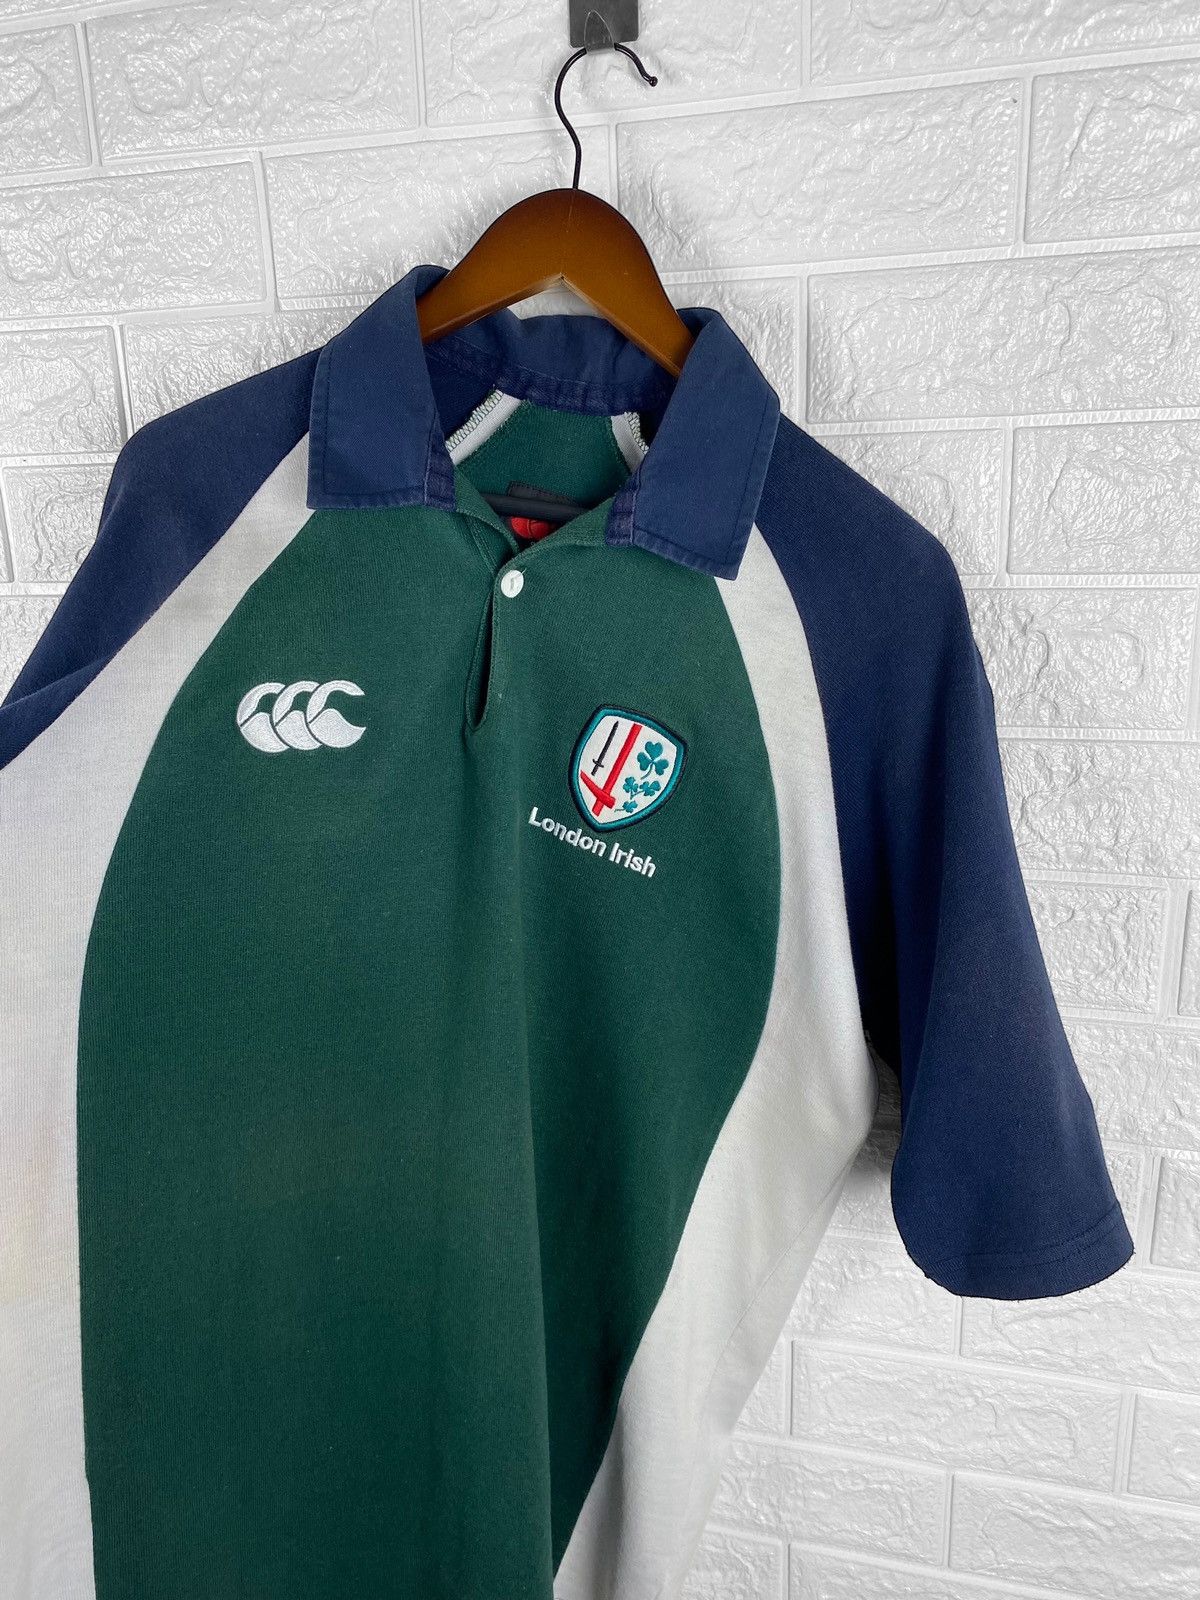 Pre-owned Canterbury Of New Zealand X England Rugby League Vintage Canterbury London Irish Rugby Polo T Shirt In Green